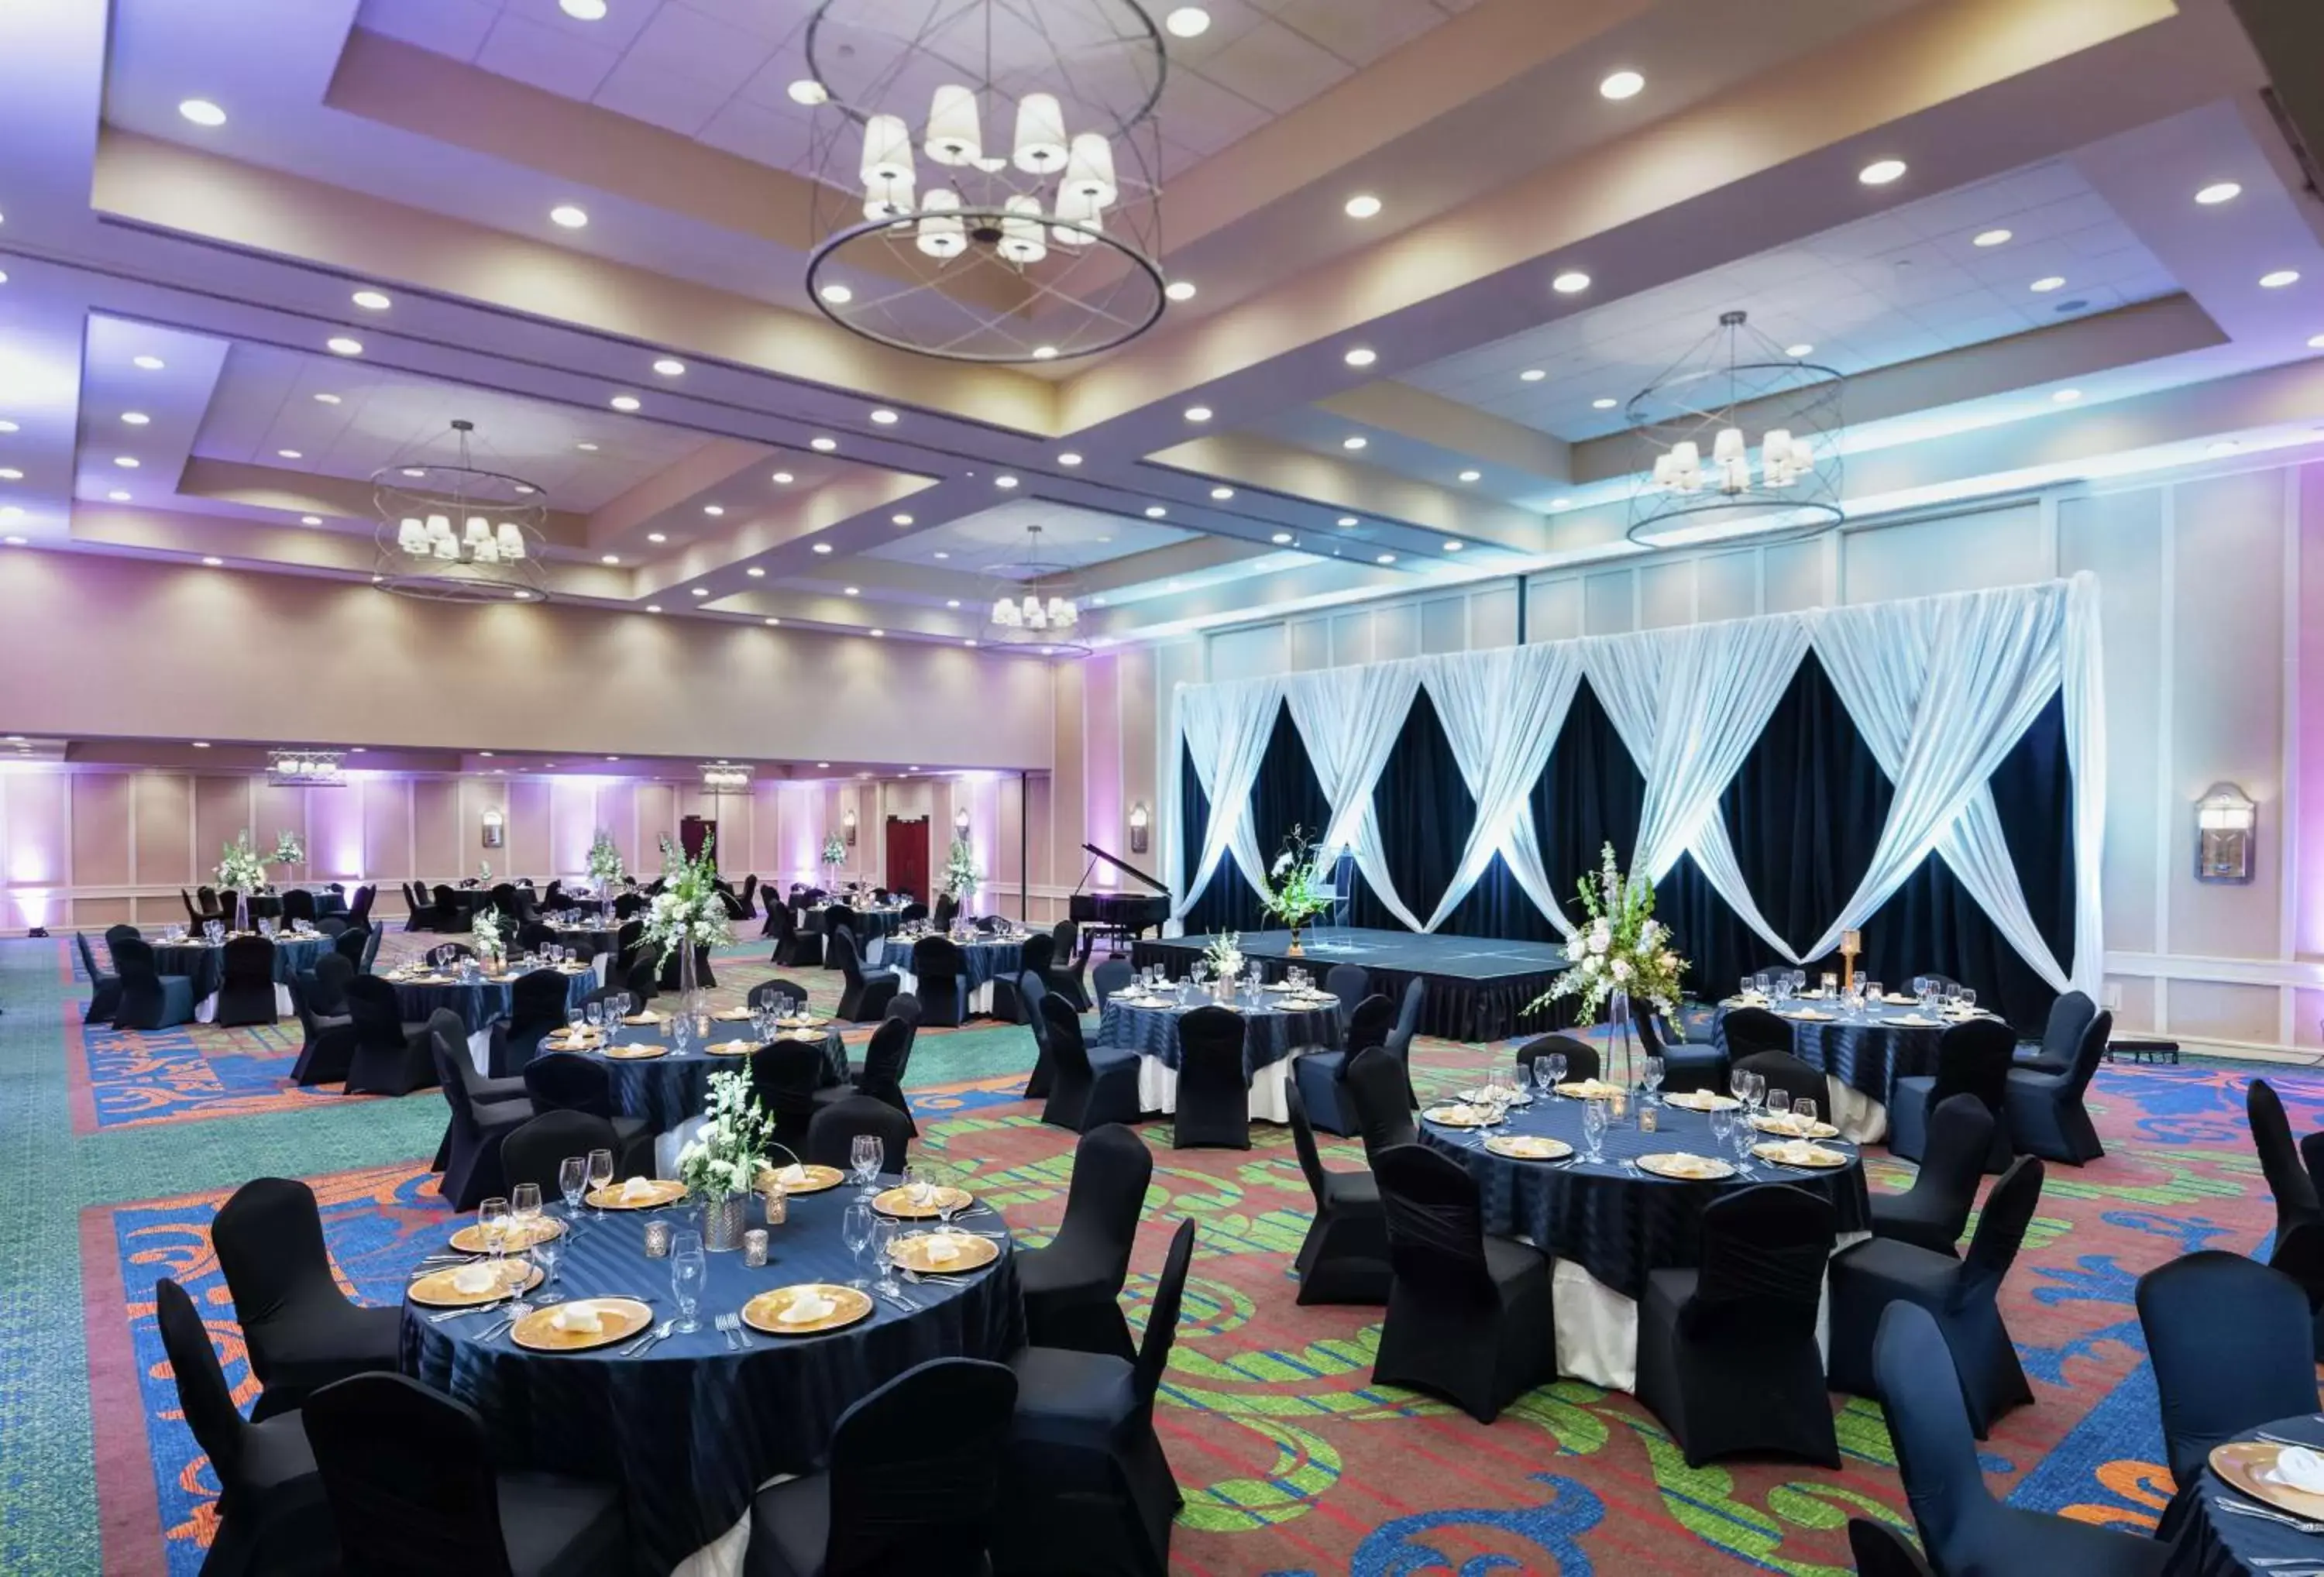 Meeting/conference room, Banquet Facilities in Hilton Lexington Downtown